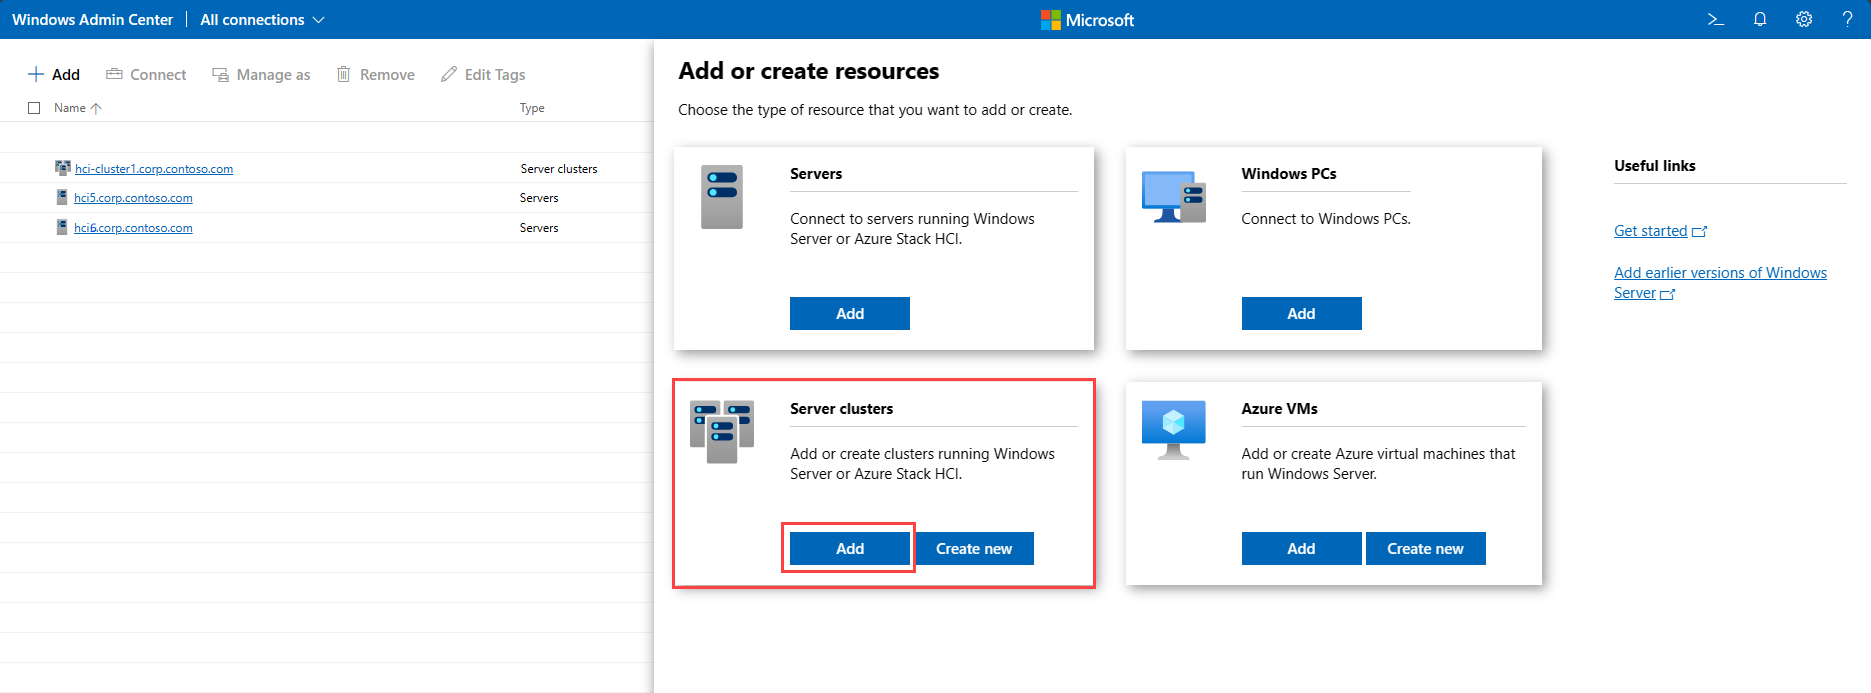 Screenshot of the Add or create resources page.